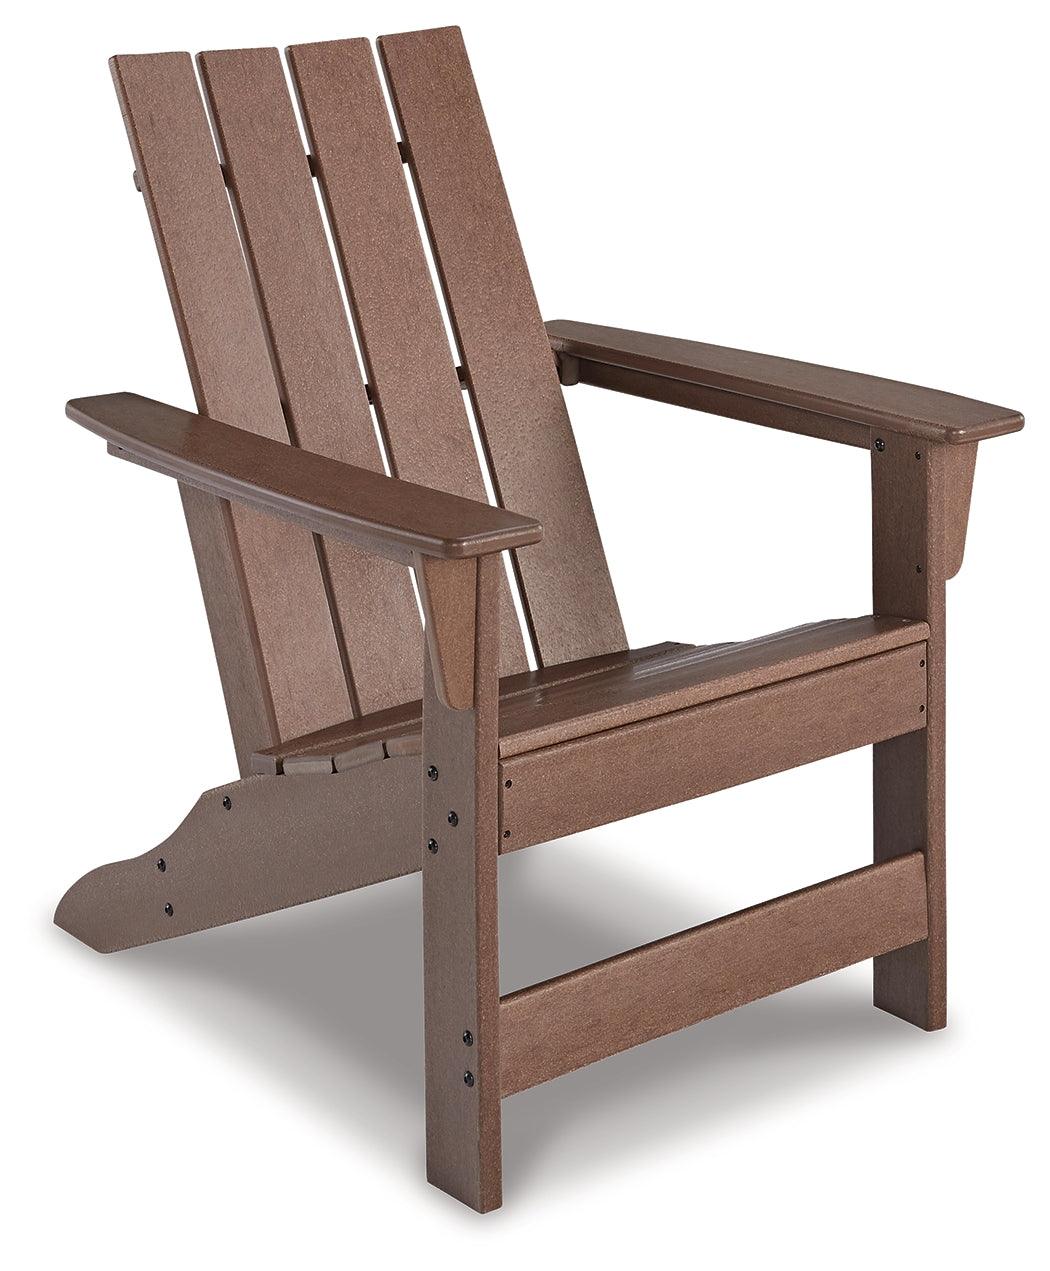 Emmeline Brown 2 Adirondack Chairs With Connector Table - Ella Furniture